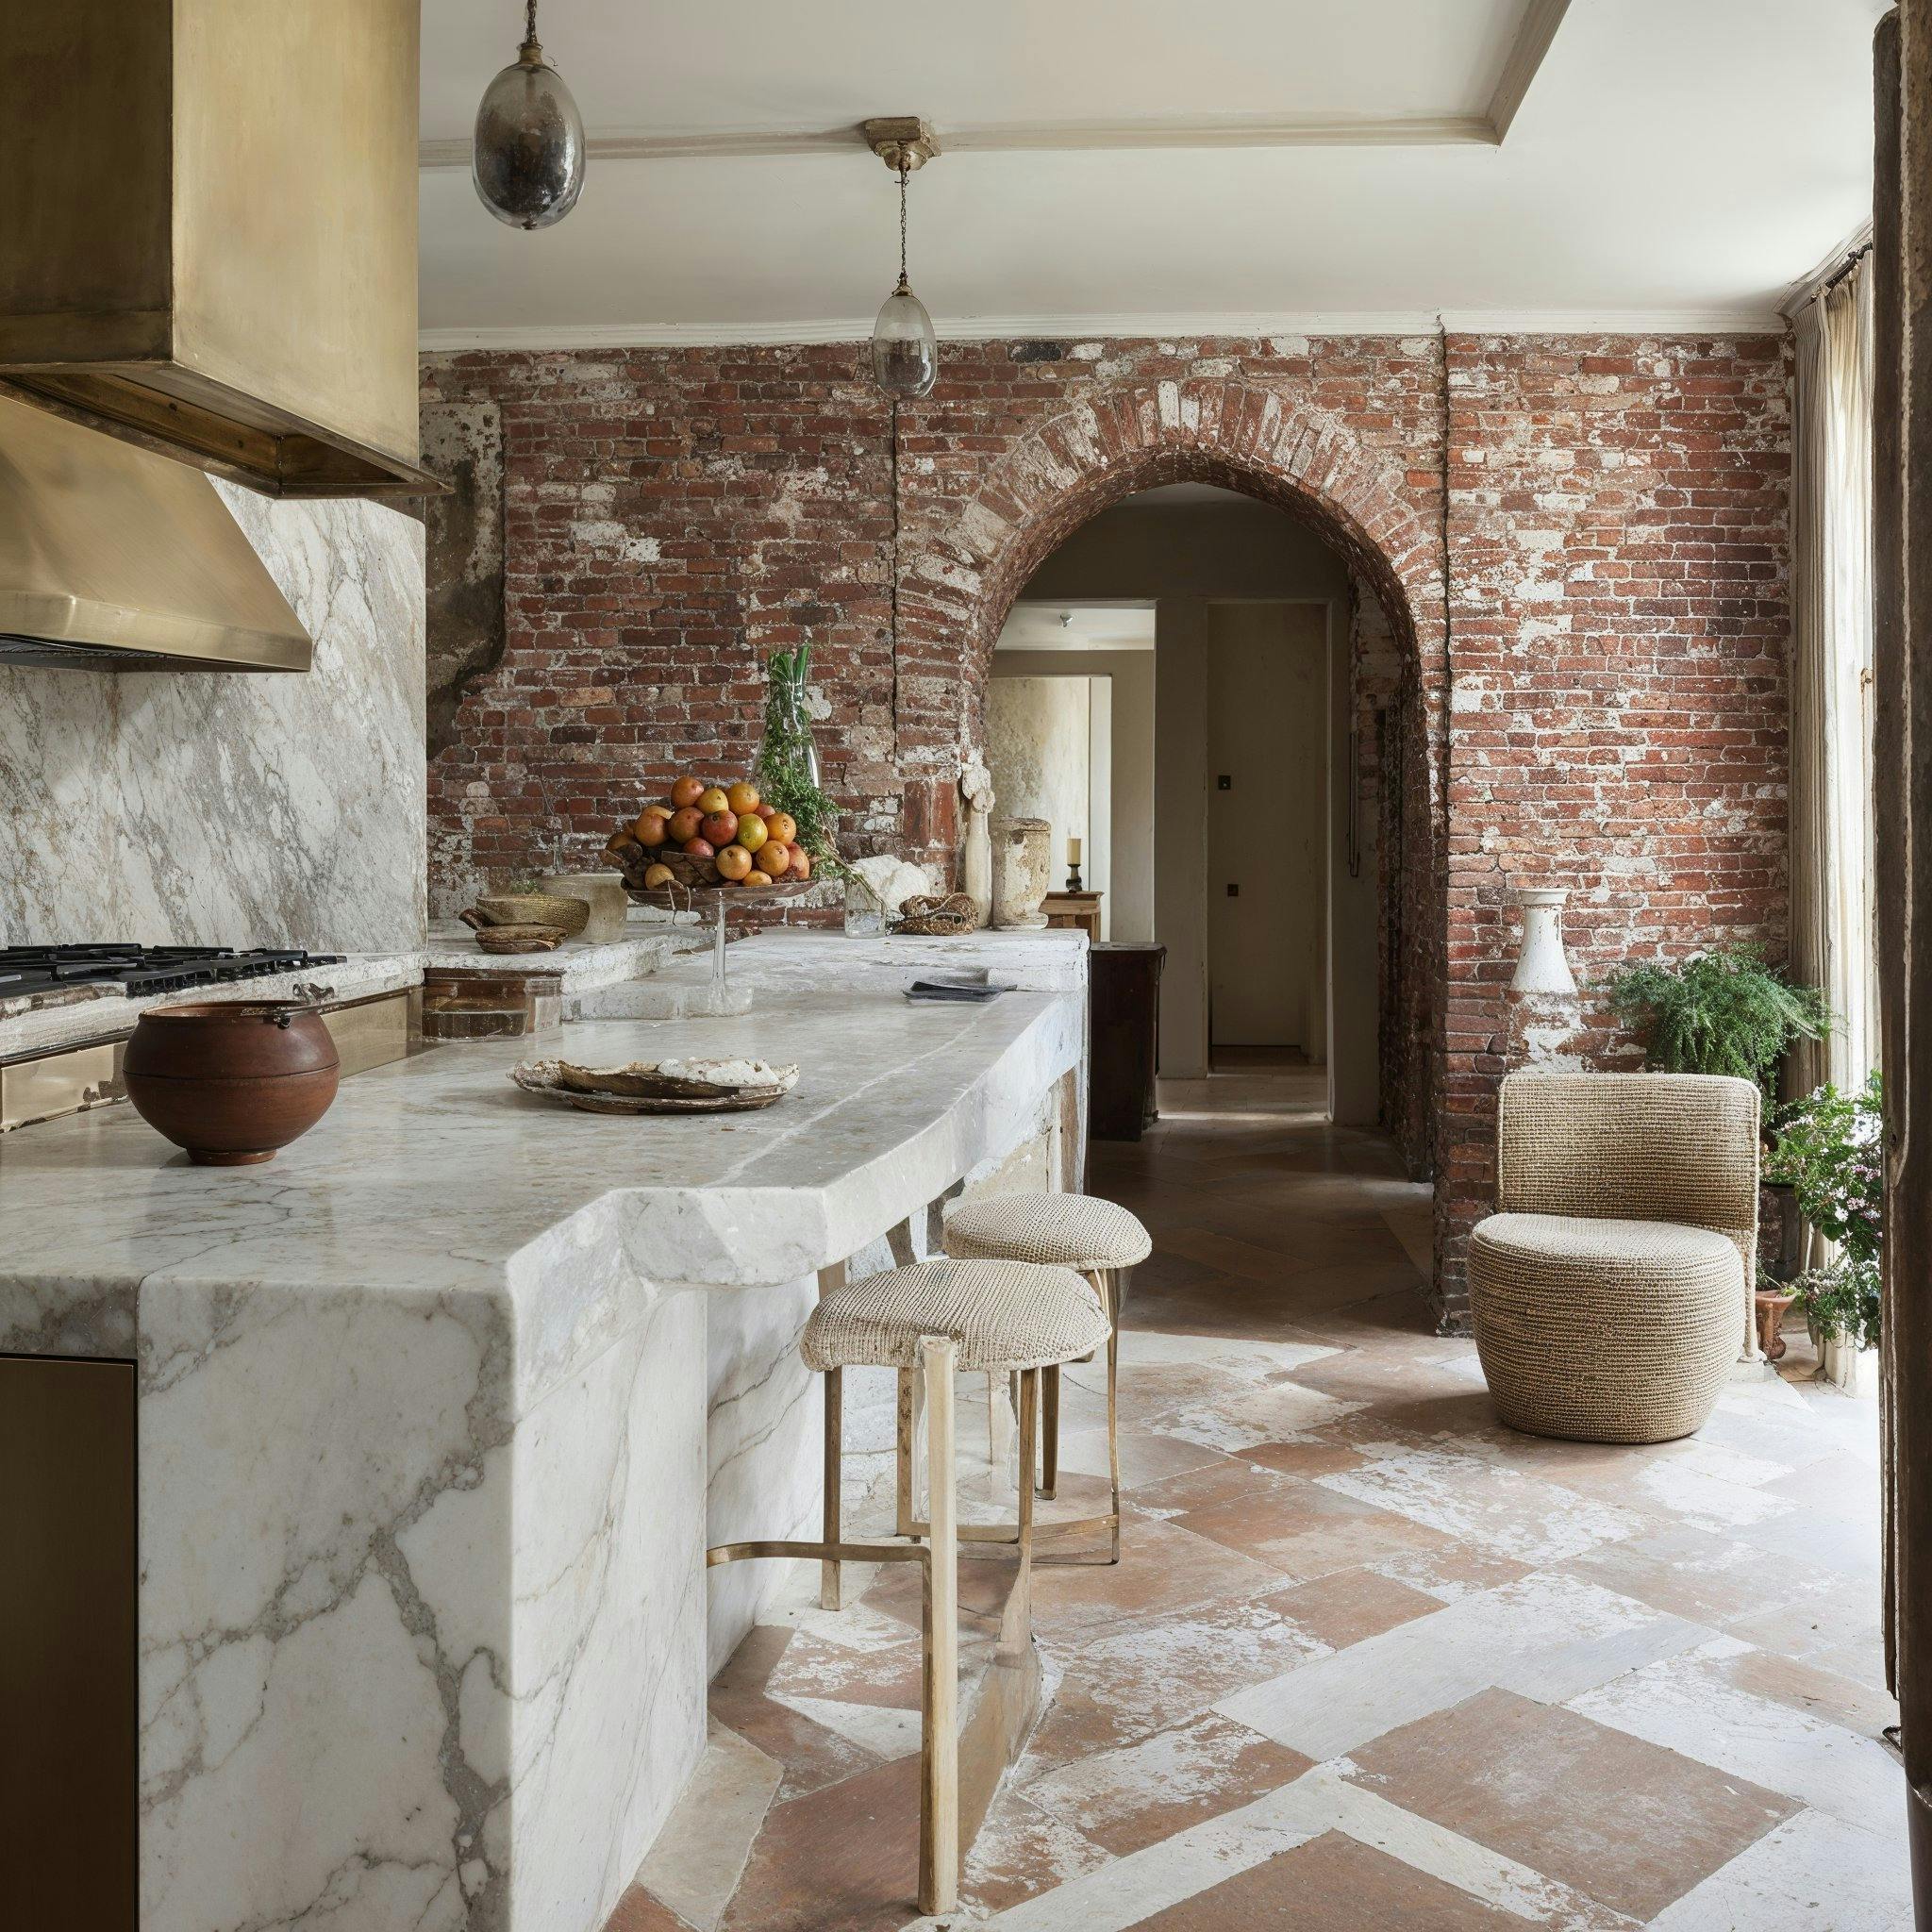 What if we imagine a scene with a kitchen where the rustic charm of exposed brickwork mingles with the opulence of marble?